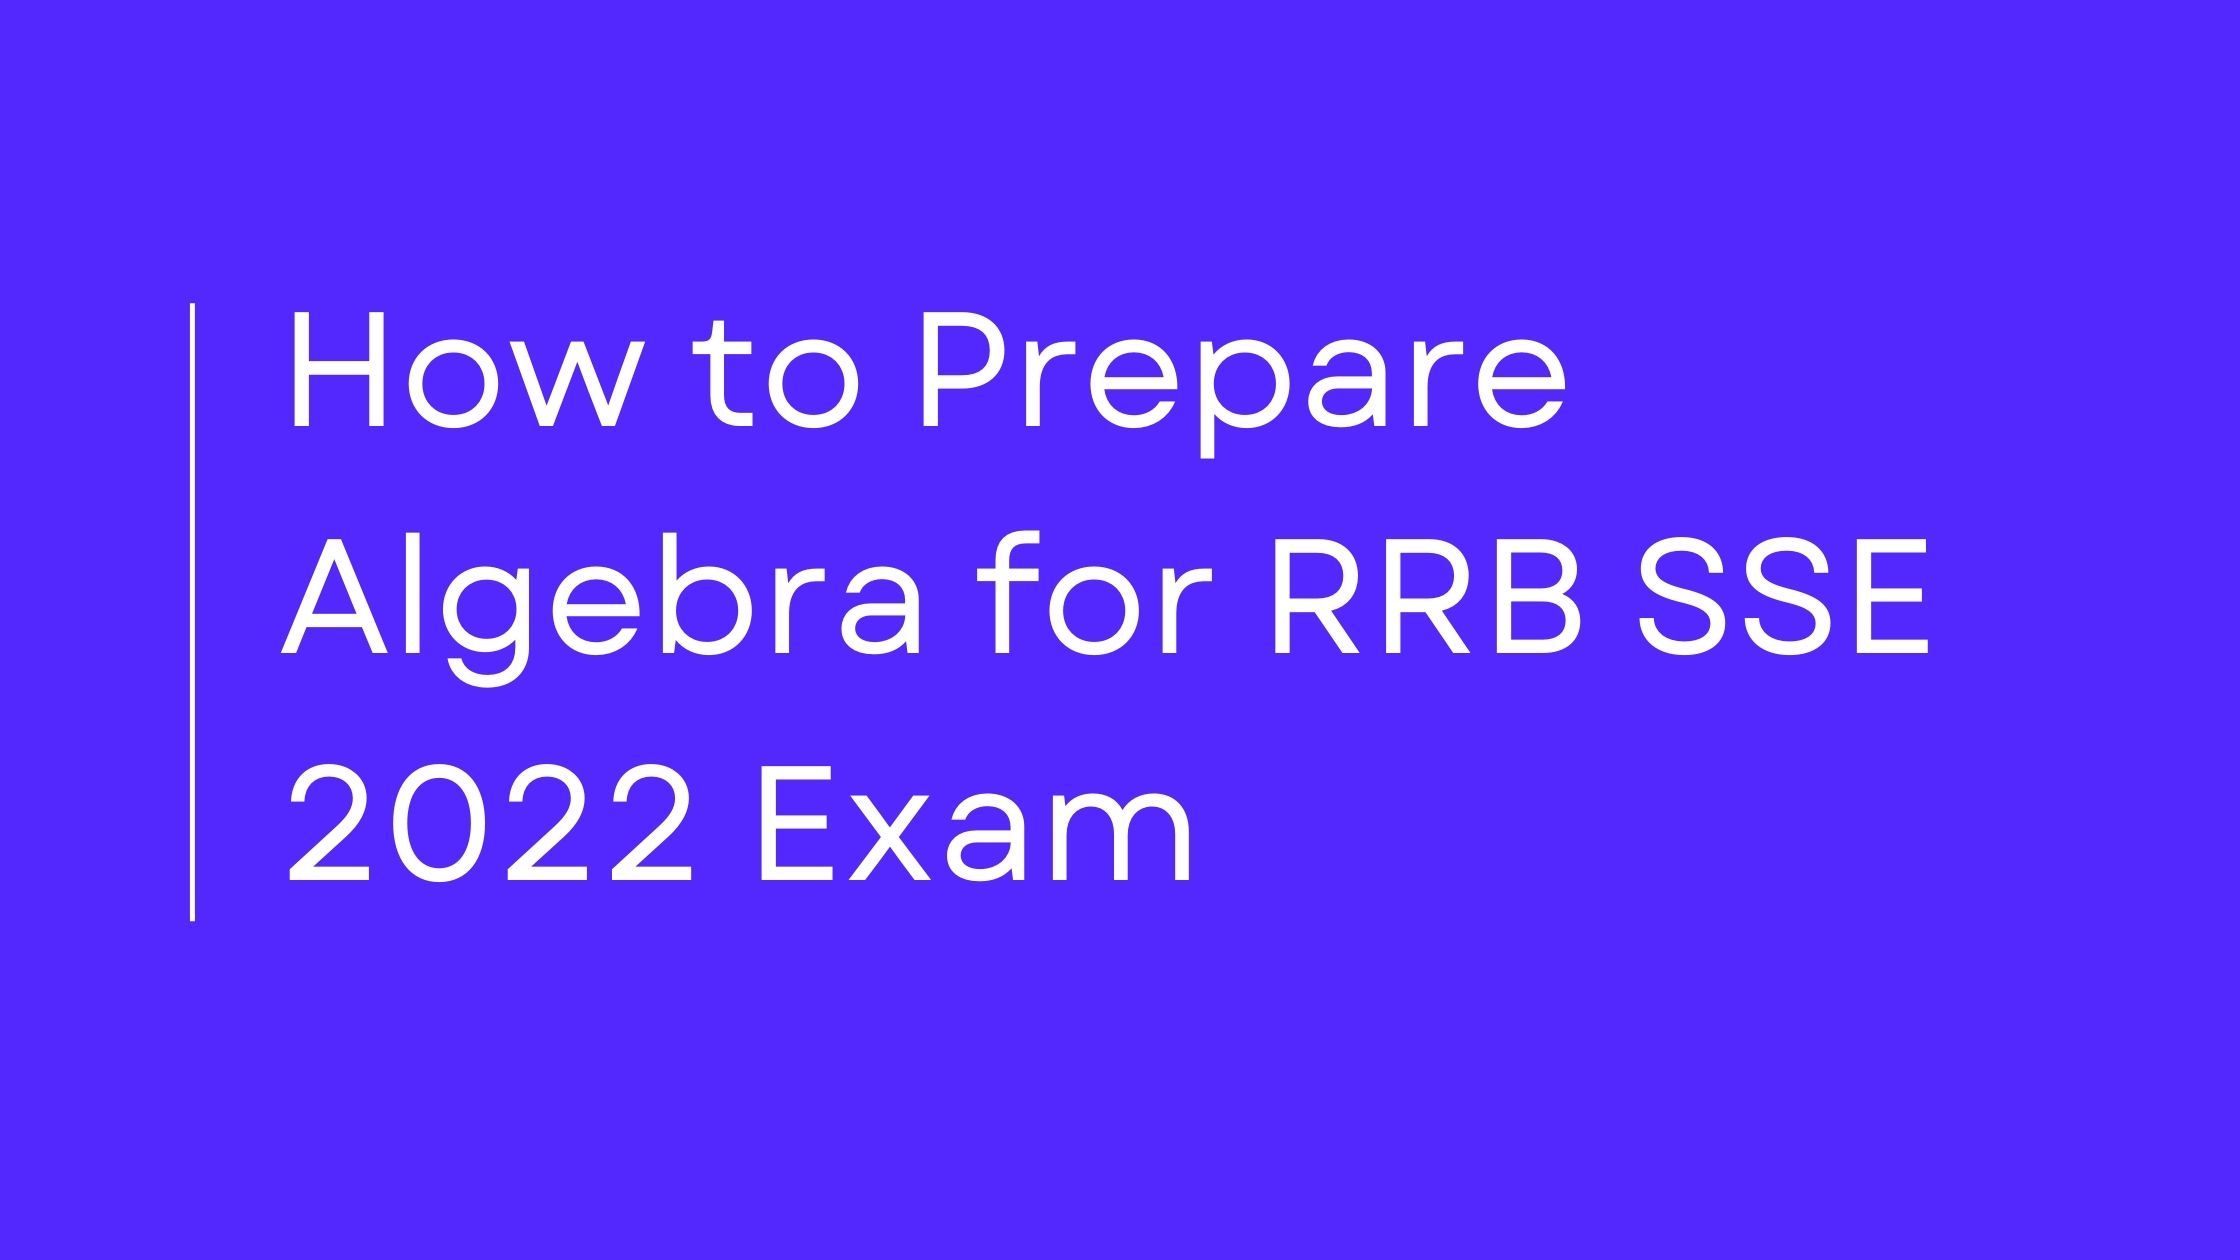 How to Prepare Algebra for RRB SSE 2022 Exam